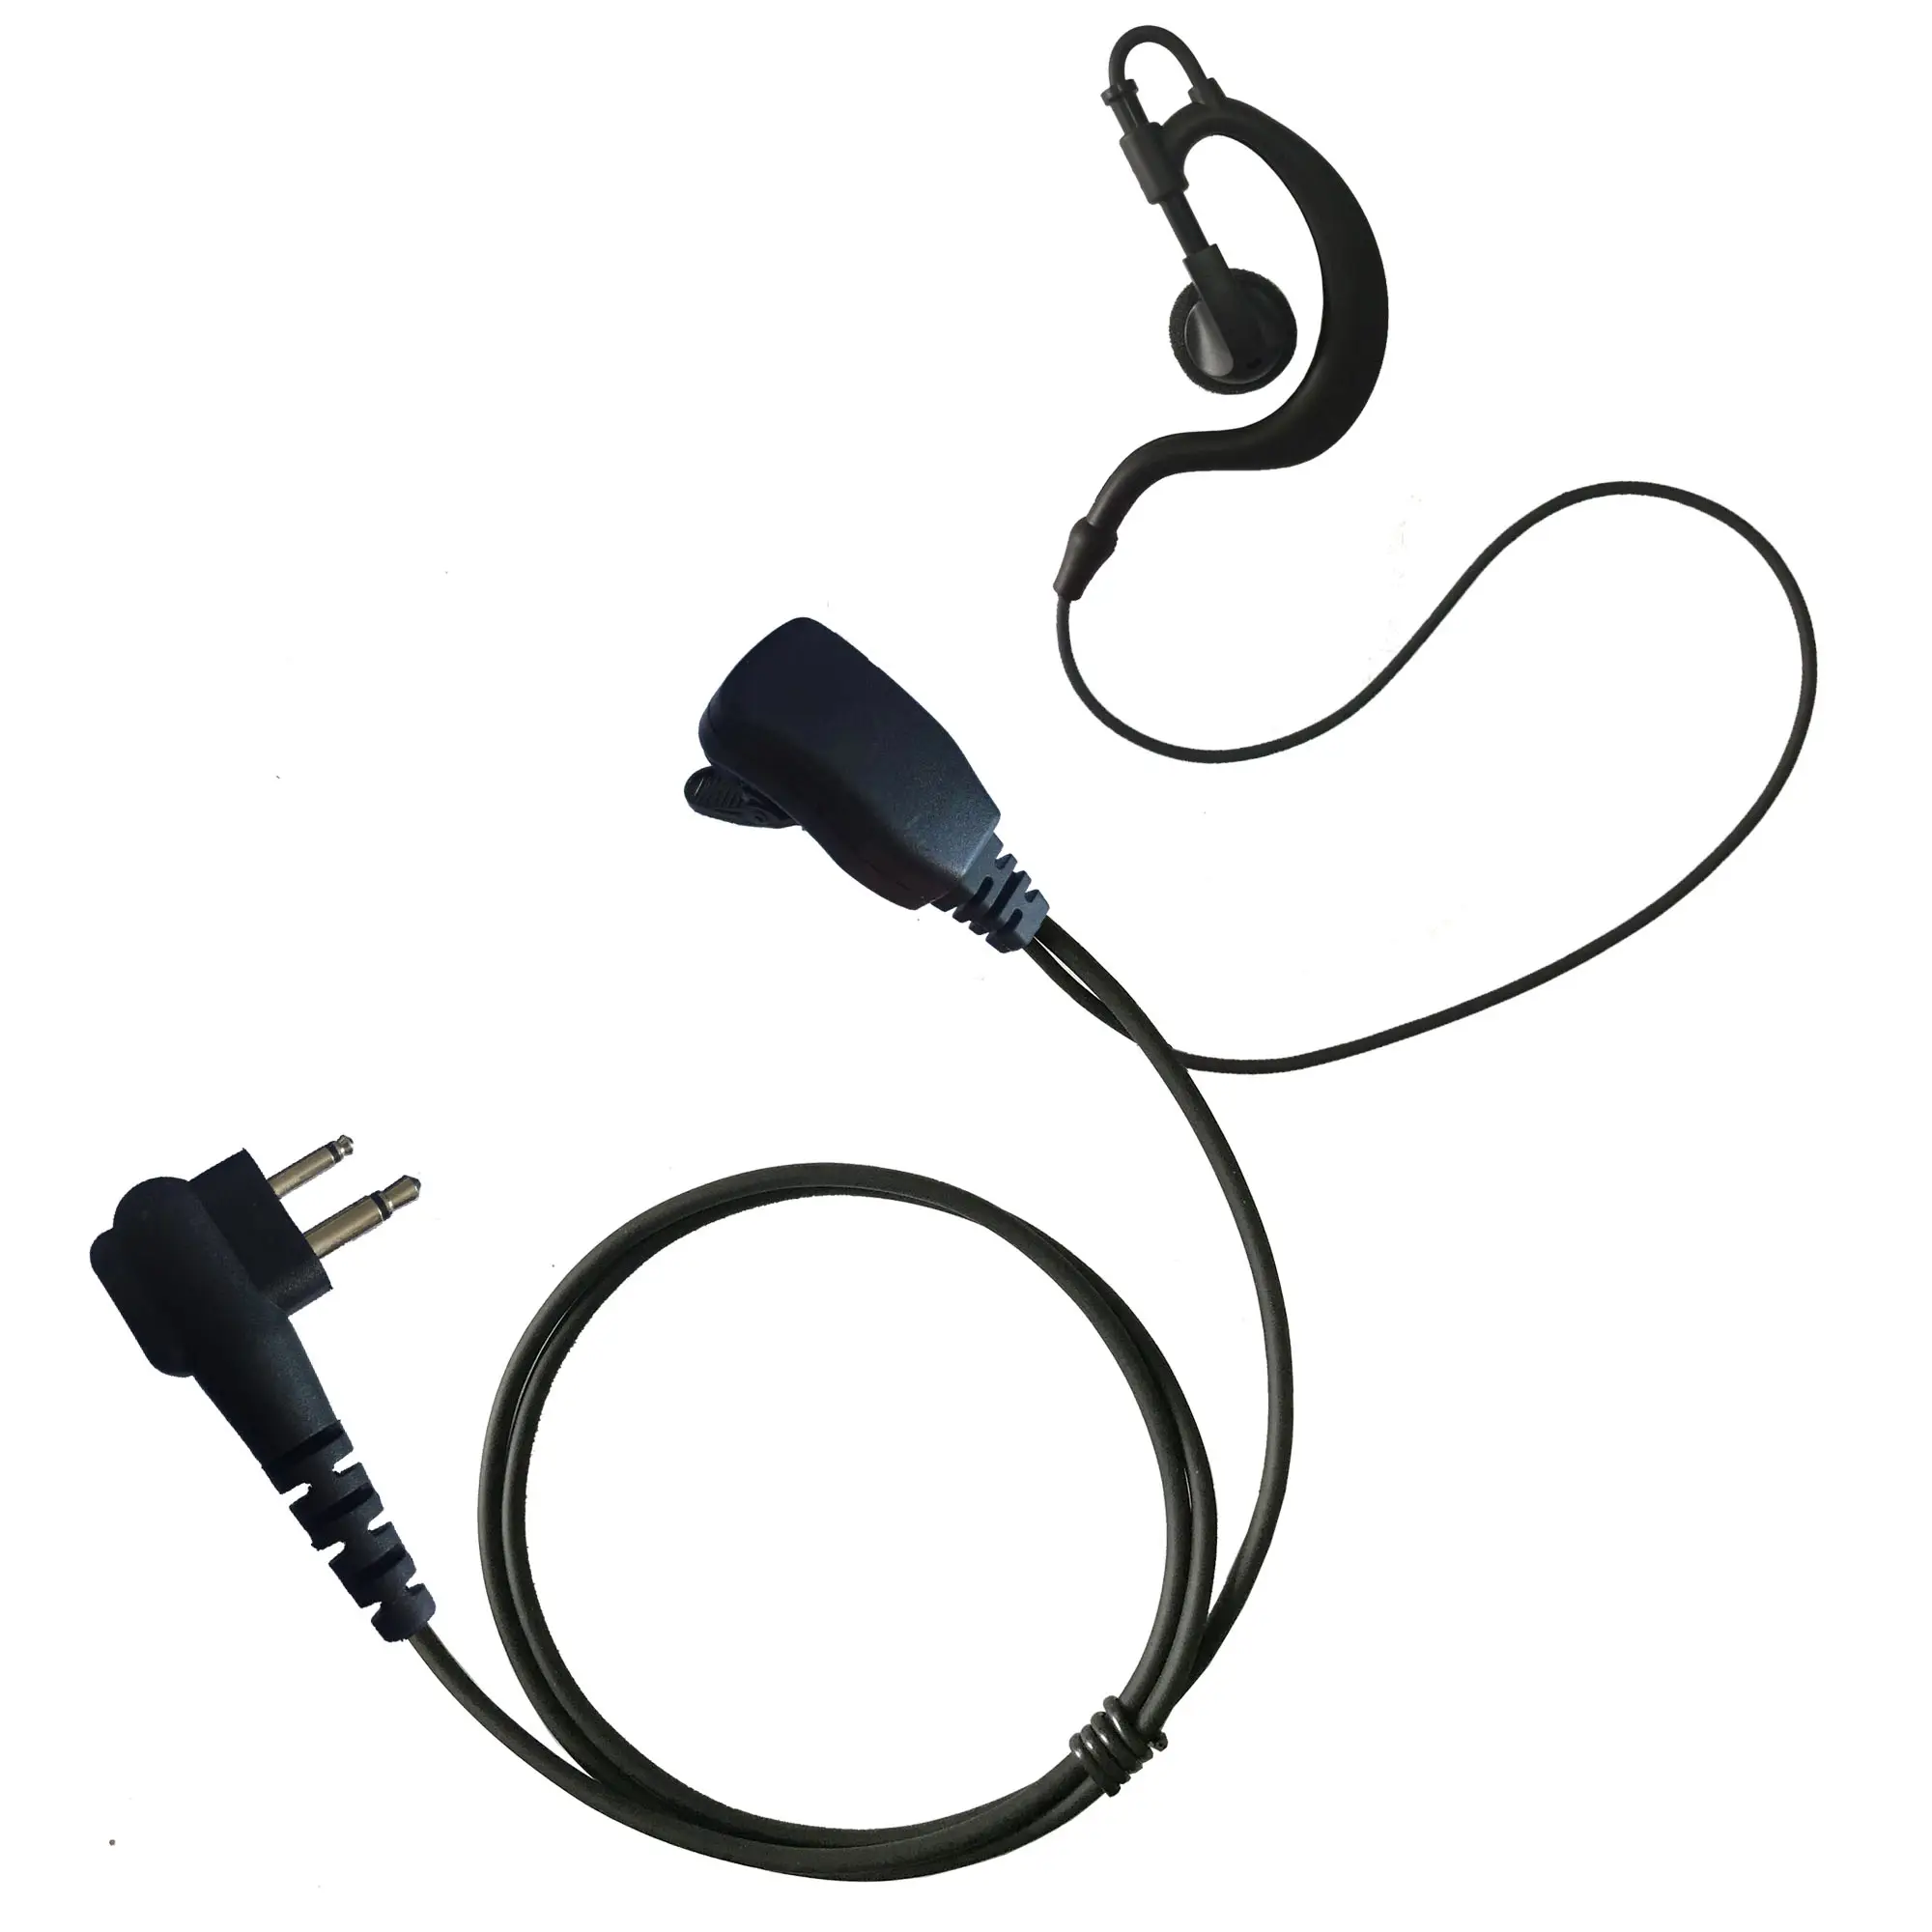 EP450 GP2000 Headset 2 Pin for Two Way Radio Walkie Talkie Acoustic Earpiece for Motorola CP200 CLS1110 CLS1410 GP3688 GP200